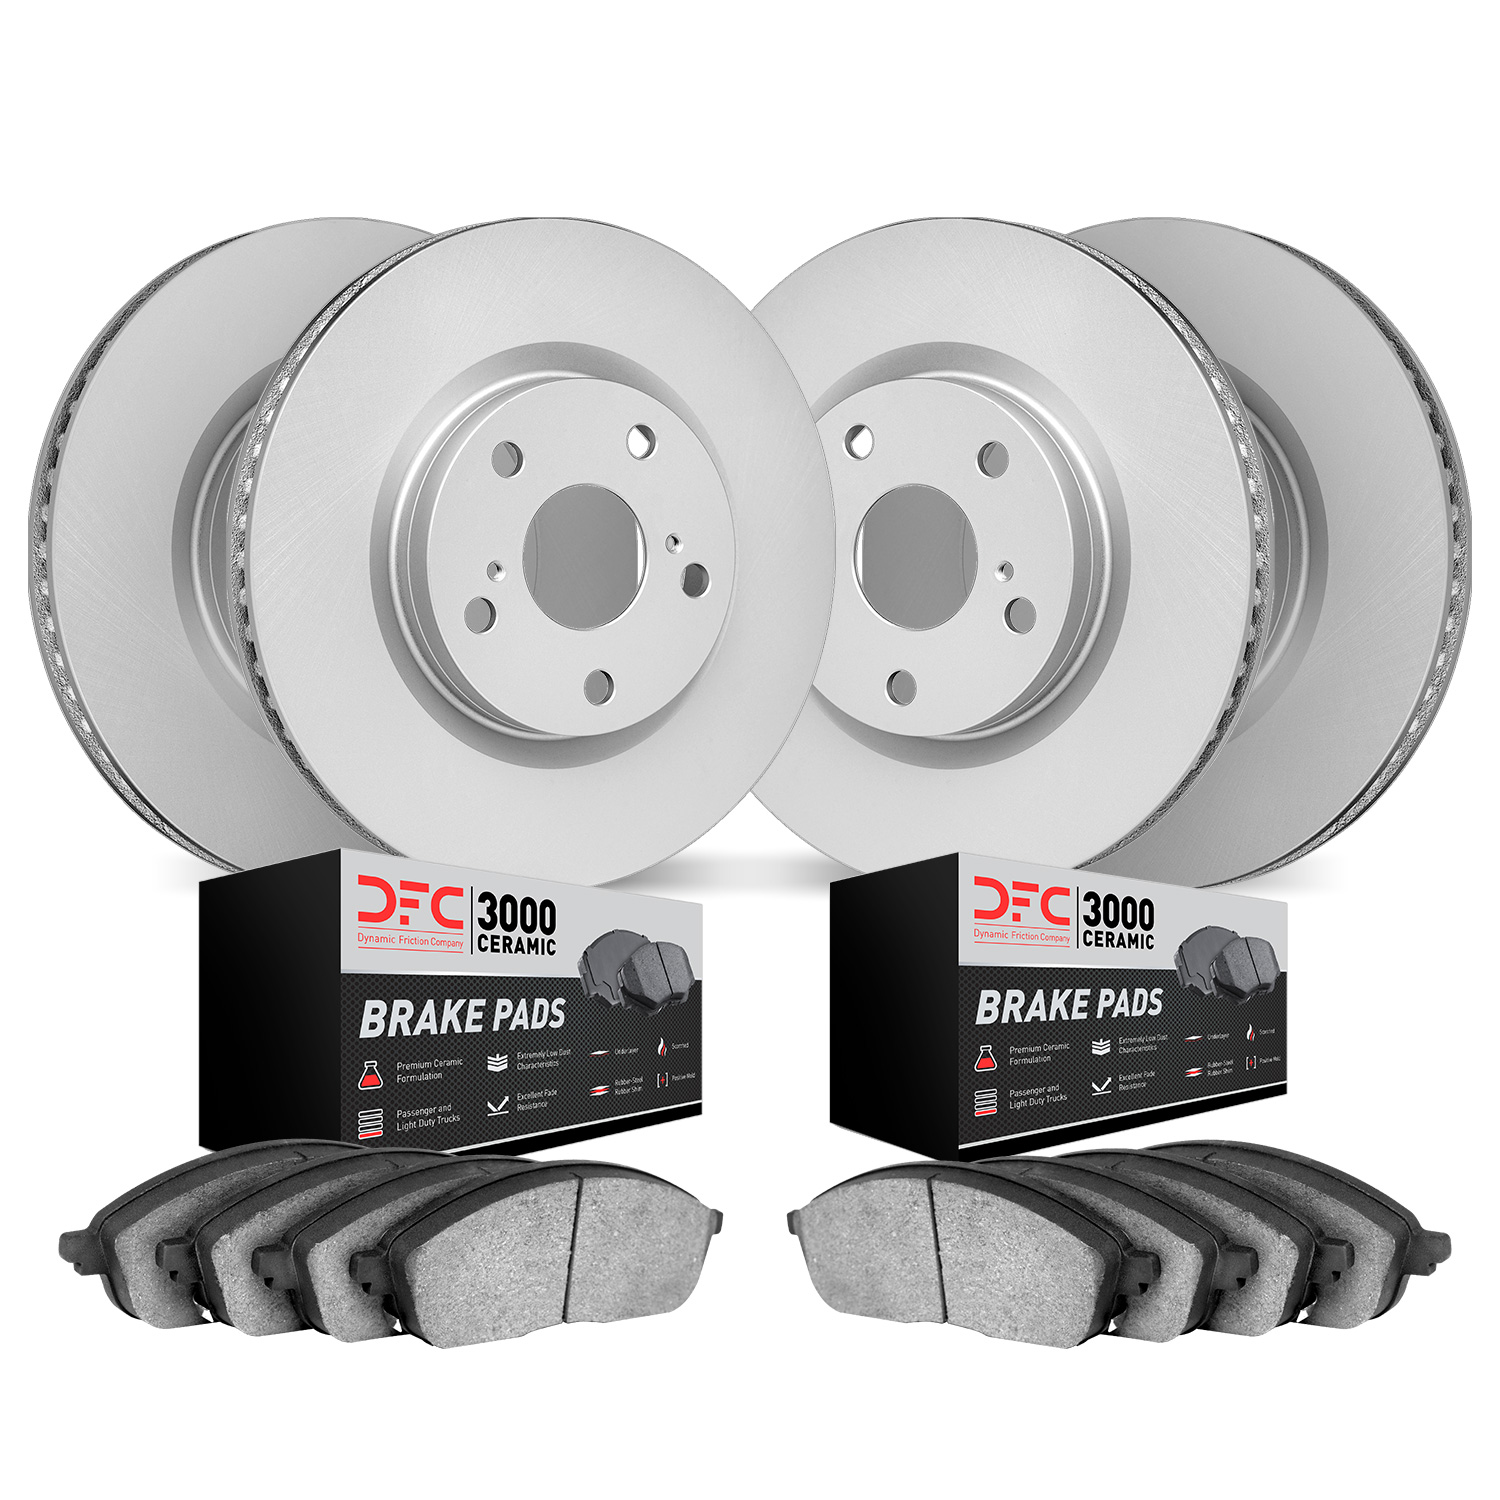 4304-56005 Geospec Brake Rotors with 3000-Series Ceramic Brake Pads Kit, 2003-2011 Ford/Lincoln/Mercury/Mazda, Position: Front a